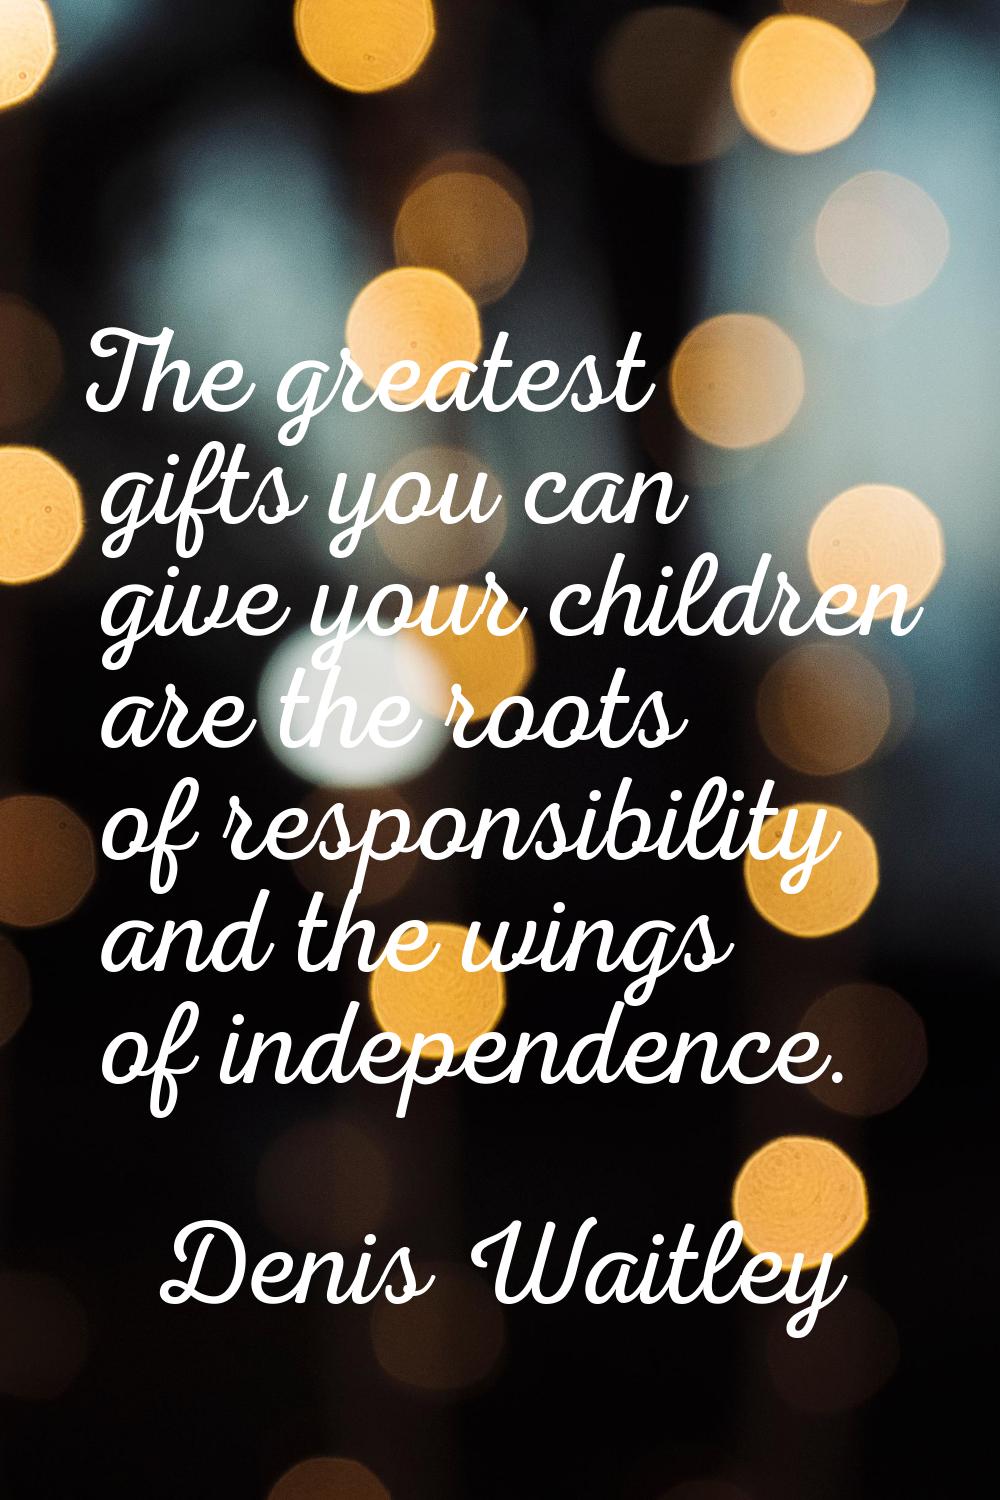 The greatest gifts you can give your children are the roots of responsibility and the wings of inde